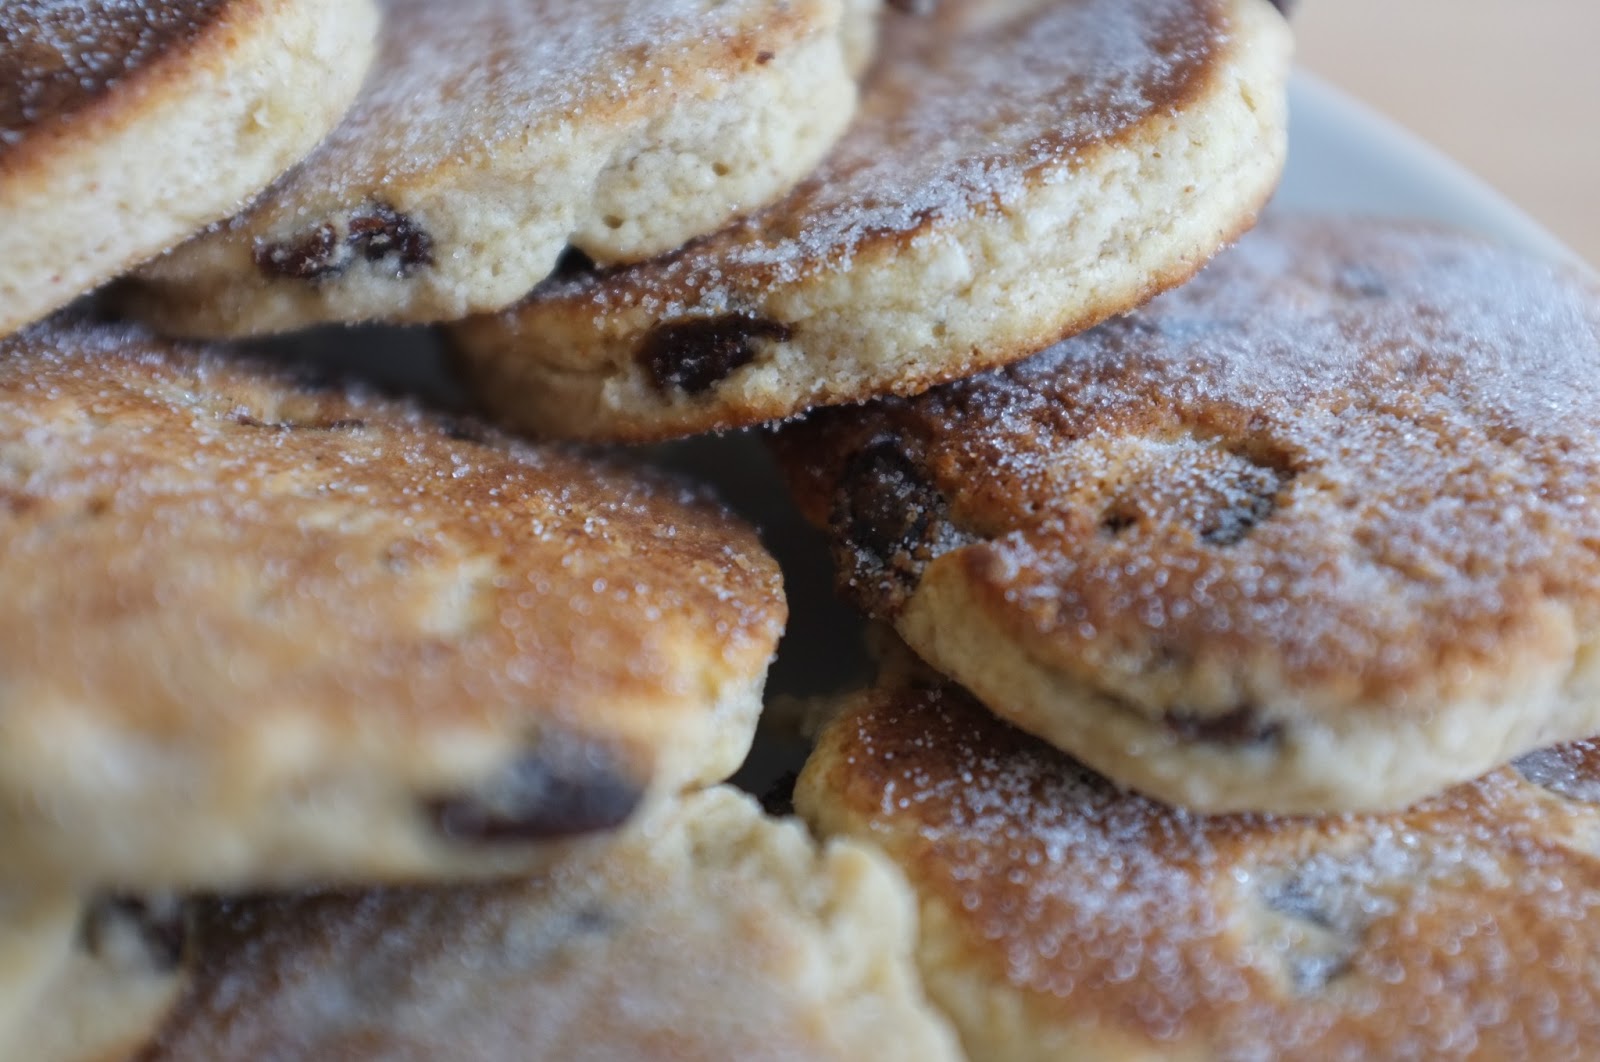 A little shop in Tokyo: Welsh cakes for hanami in Tokyo (recipe!)